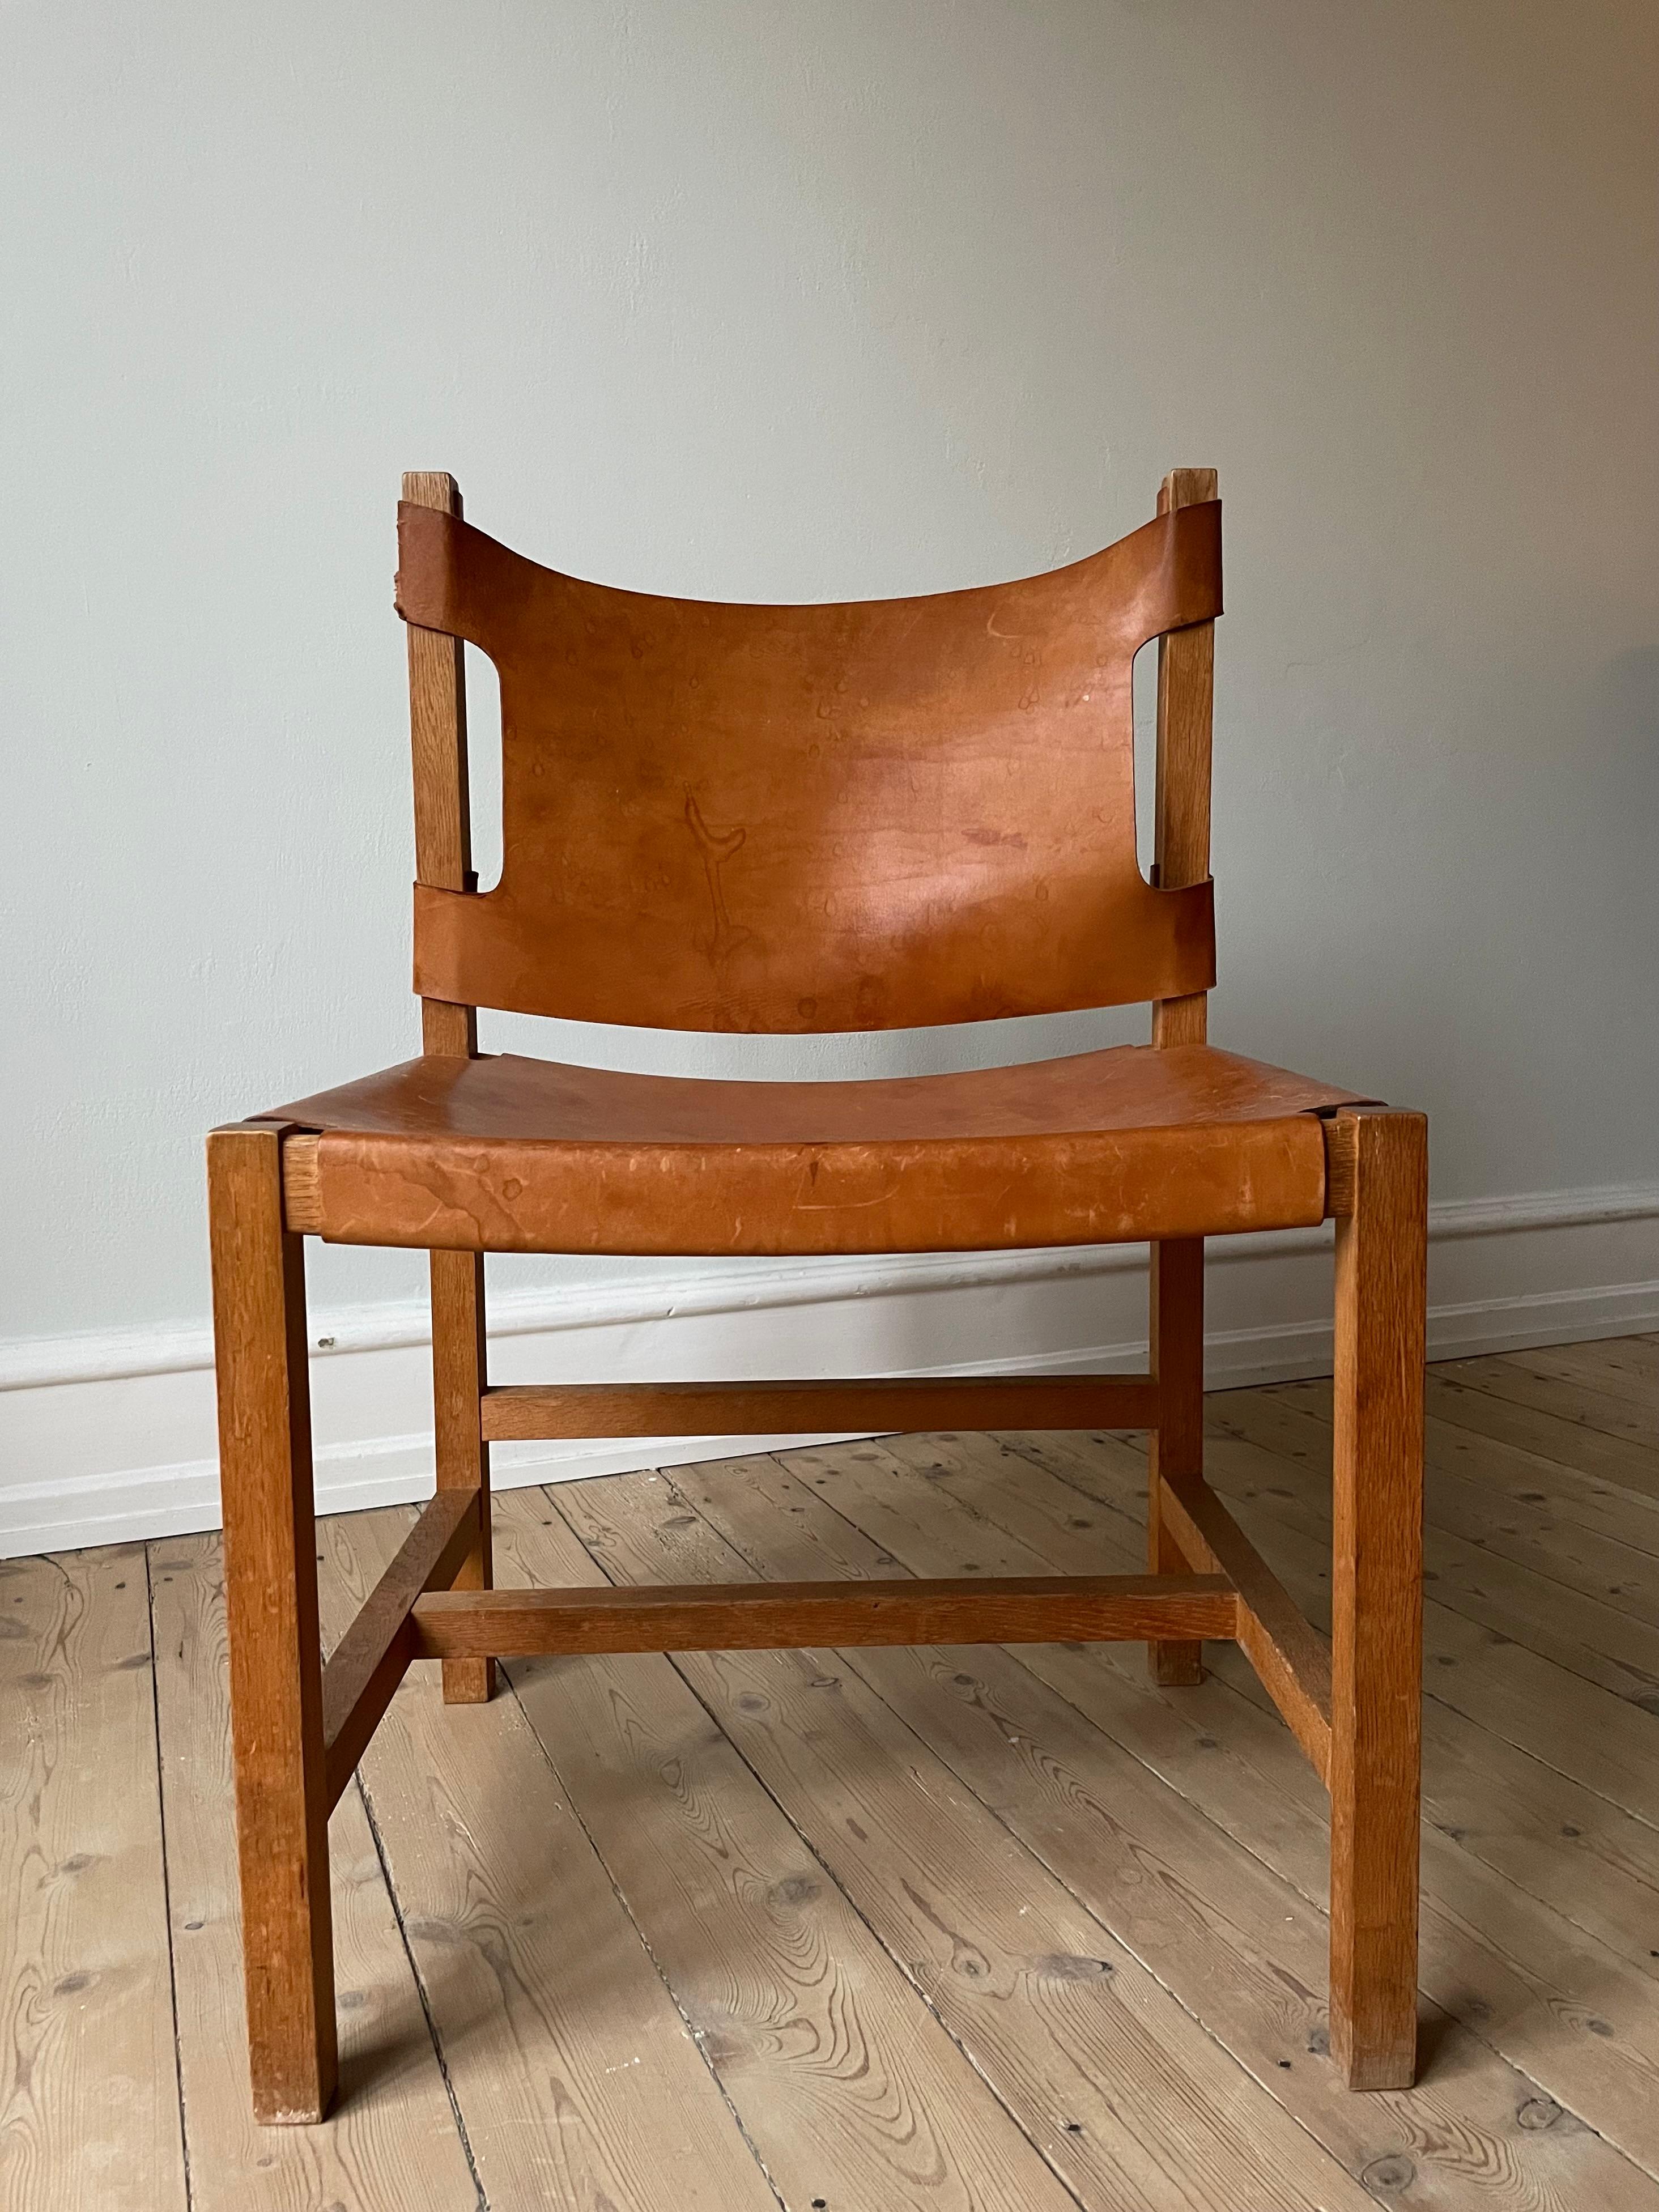 Hand-Crafted Danish Modern Wooden Leather Seat Chair, 1960s For Sale